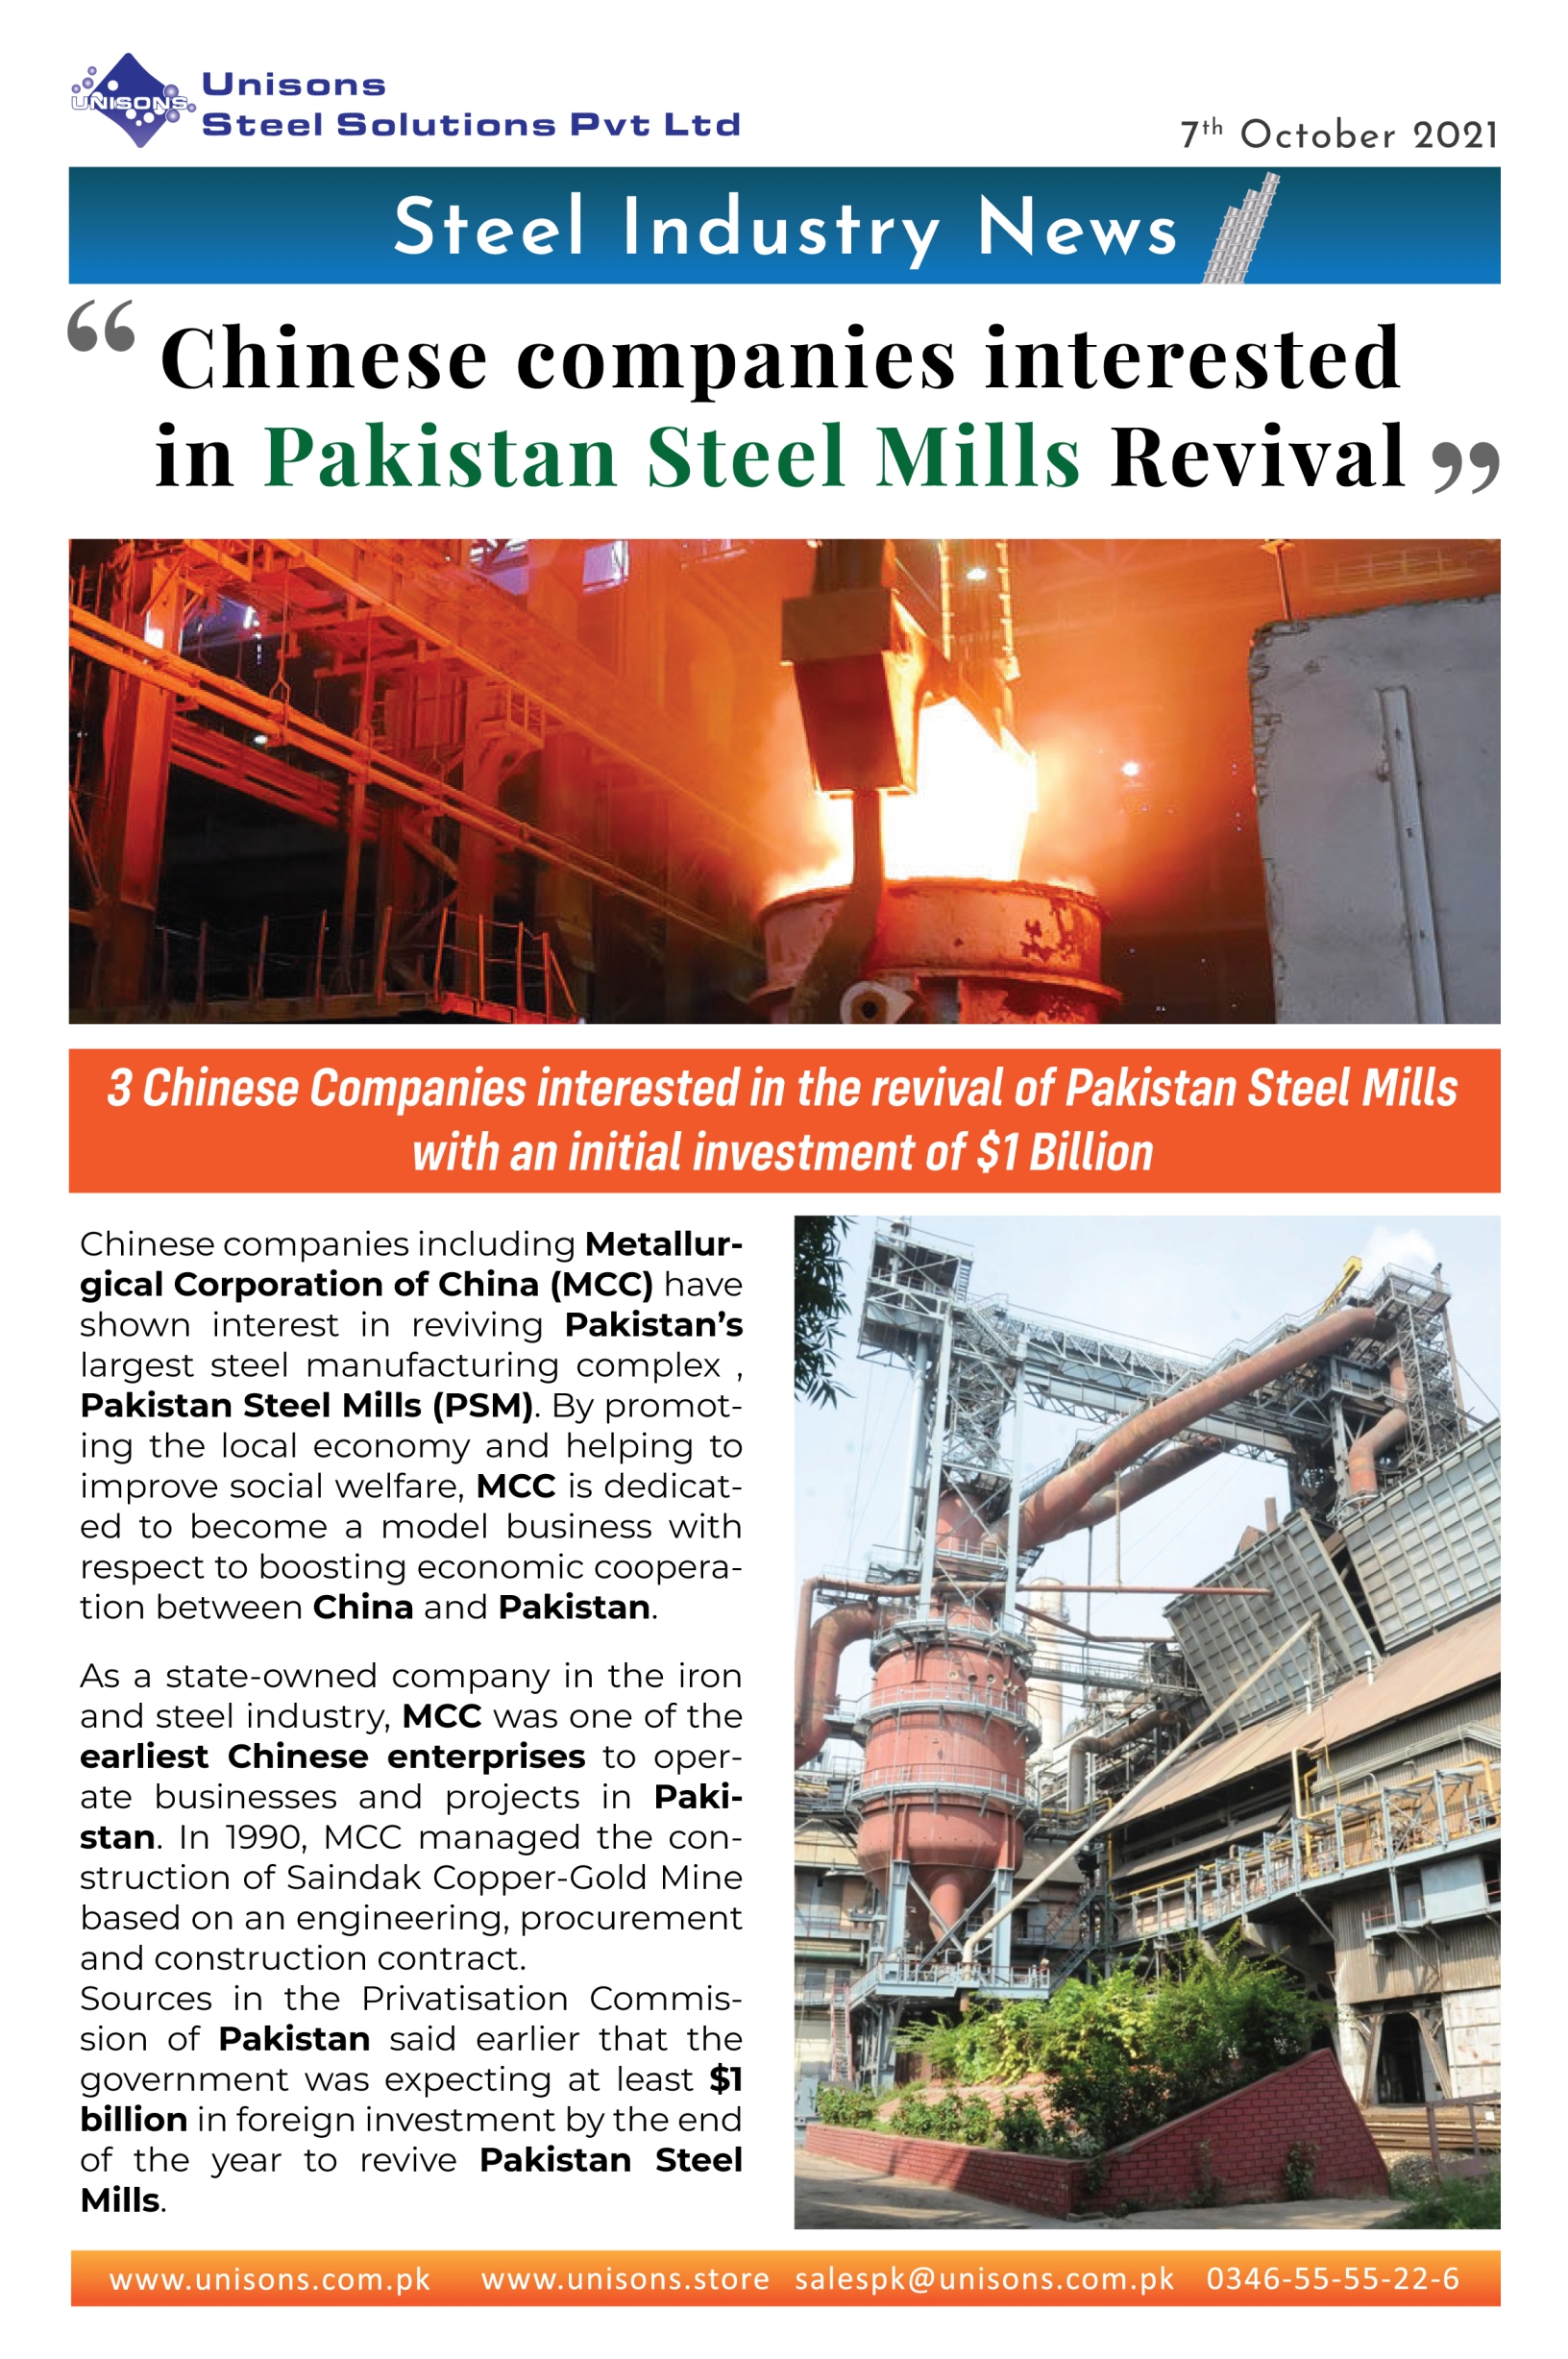 Chinese companies interested in Pakistan Steel Mills Revival